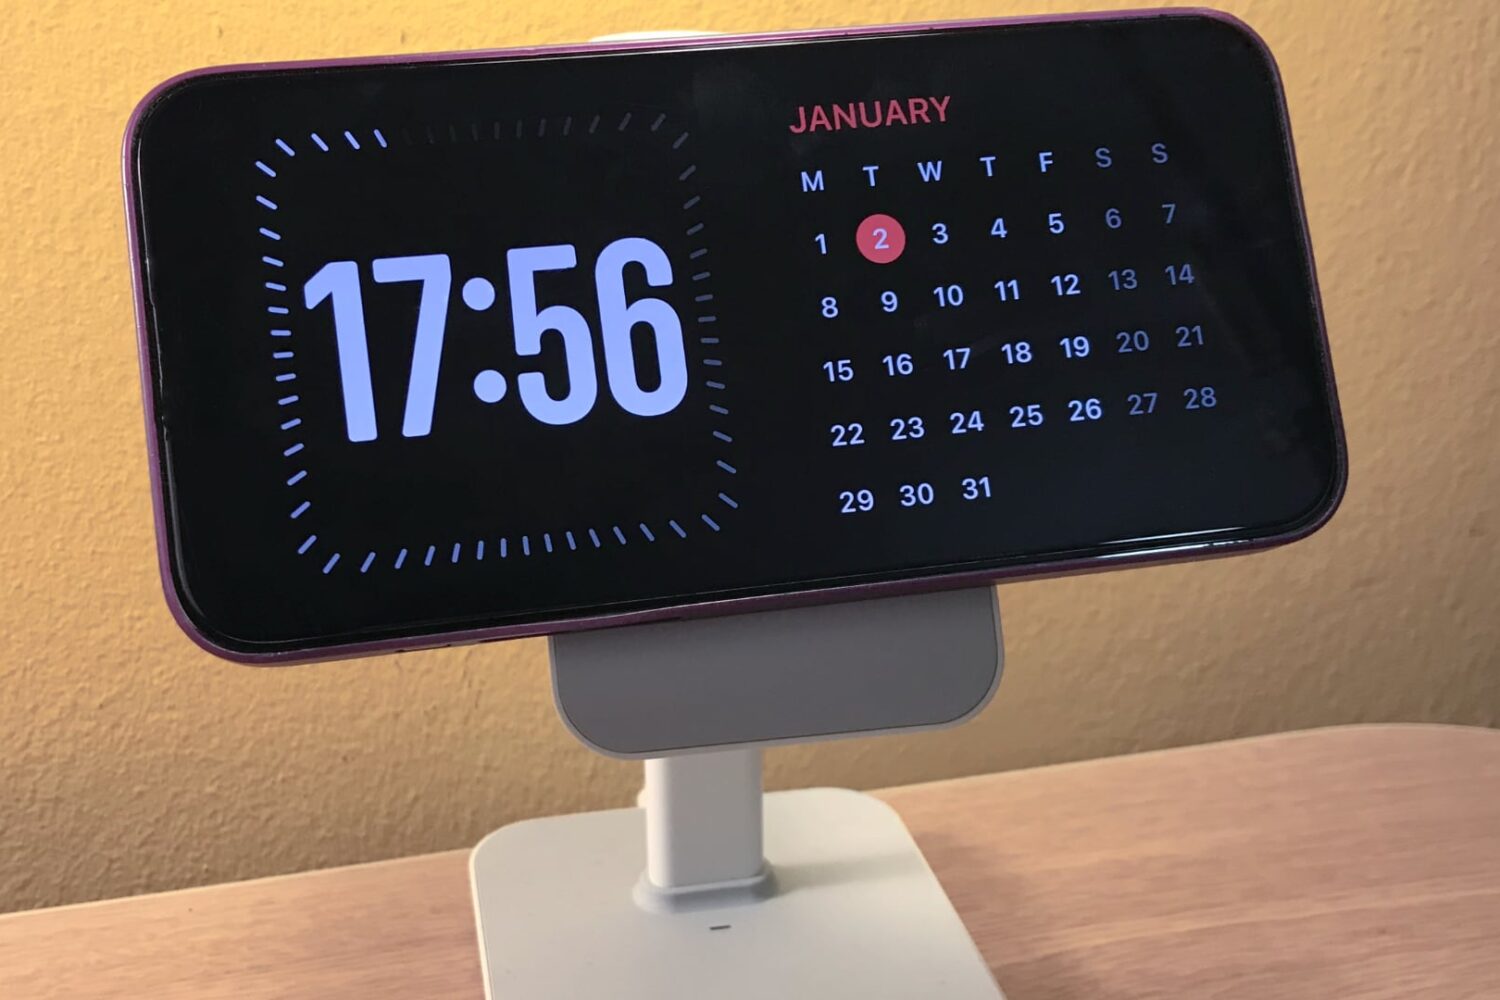 Digital clock and calendar in StandBy Mode on iPhone